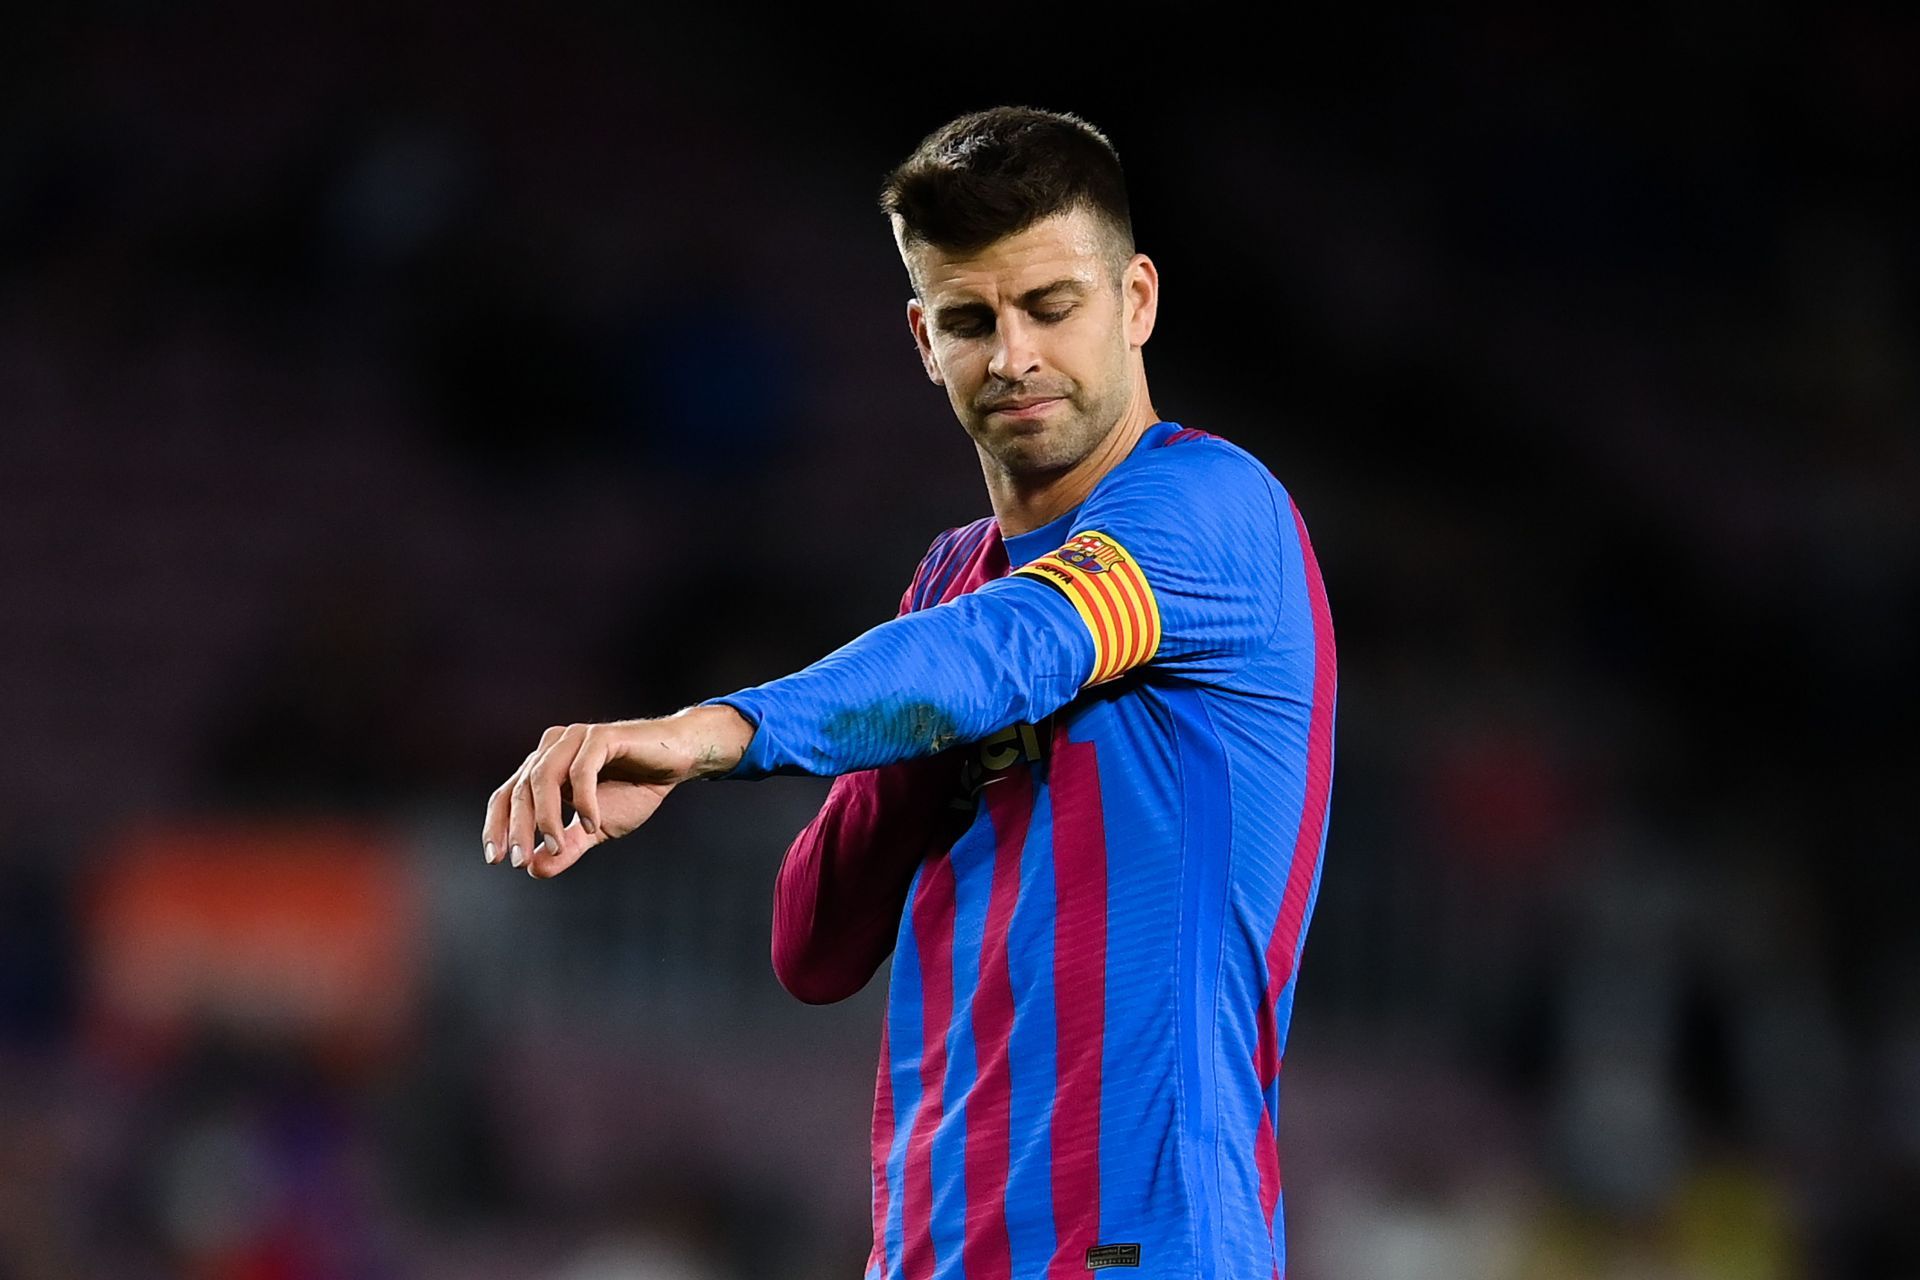 Gerard Pique is entering the twilight of his career